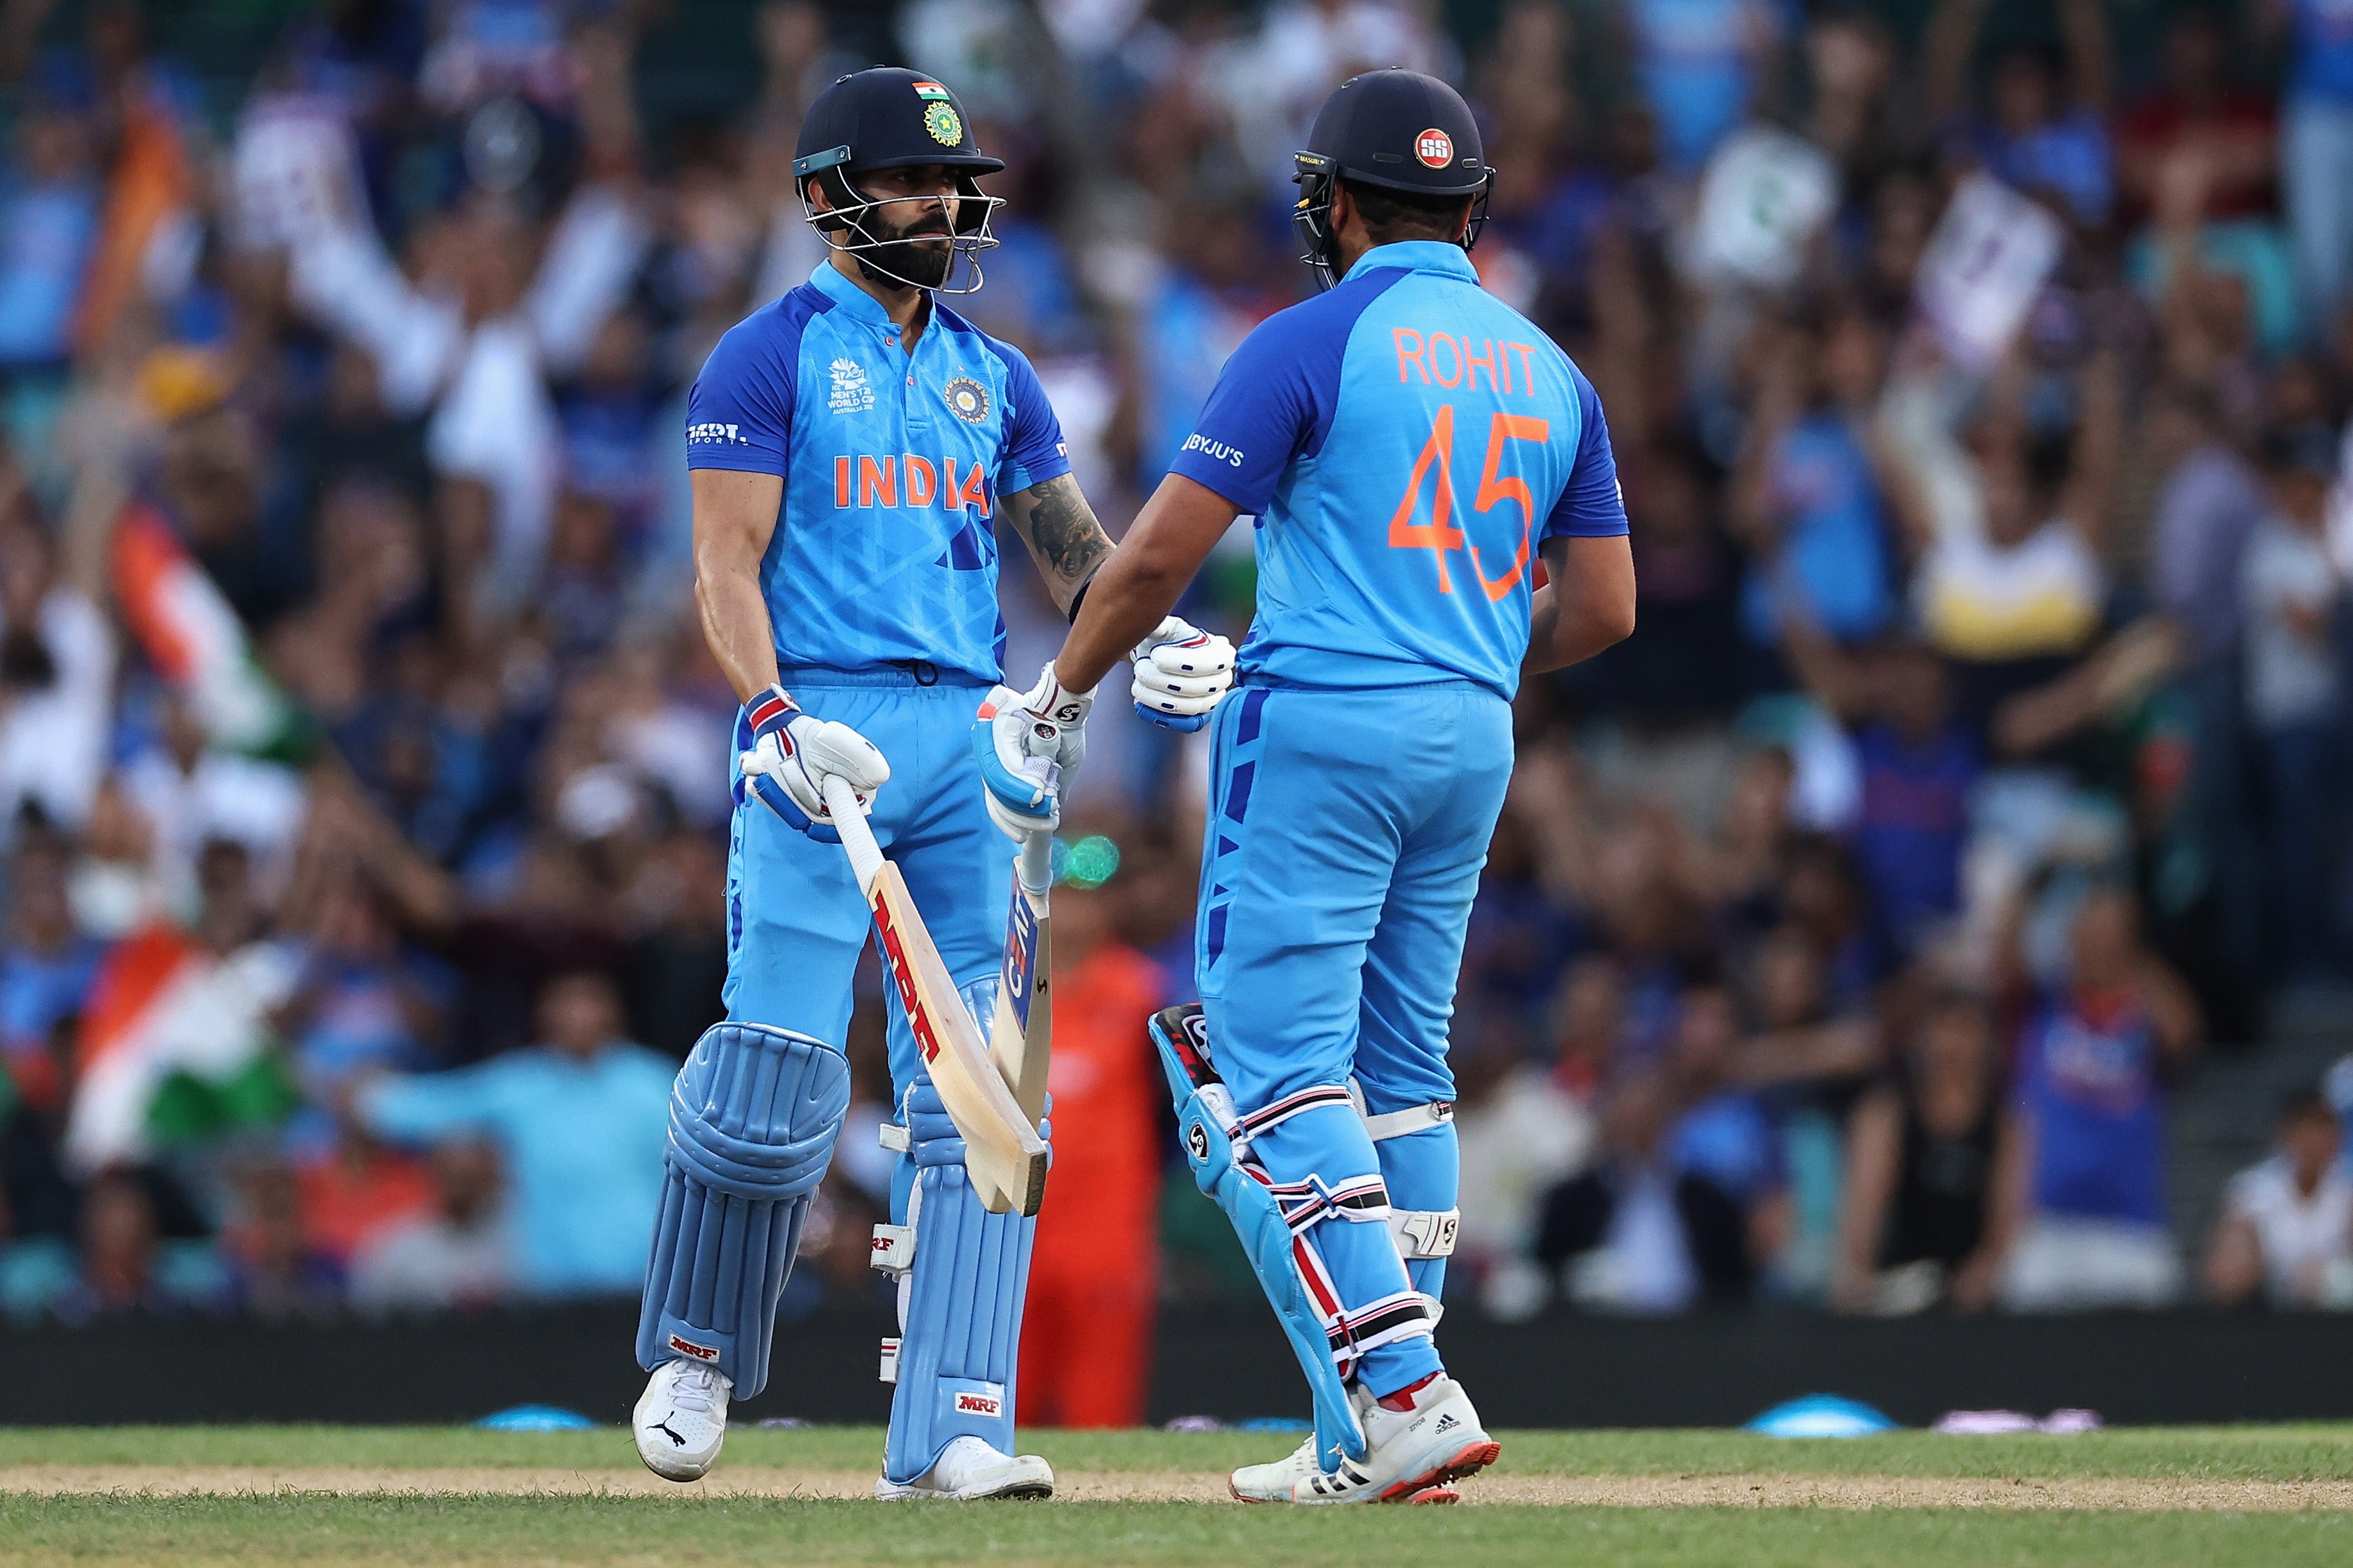 Virat Kohli and Rohit Sharma will lead India at the T20 World Cup